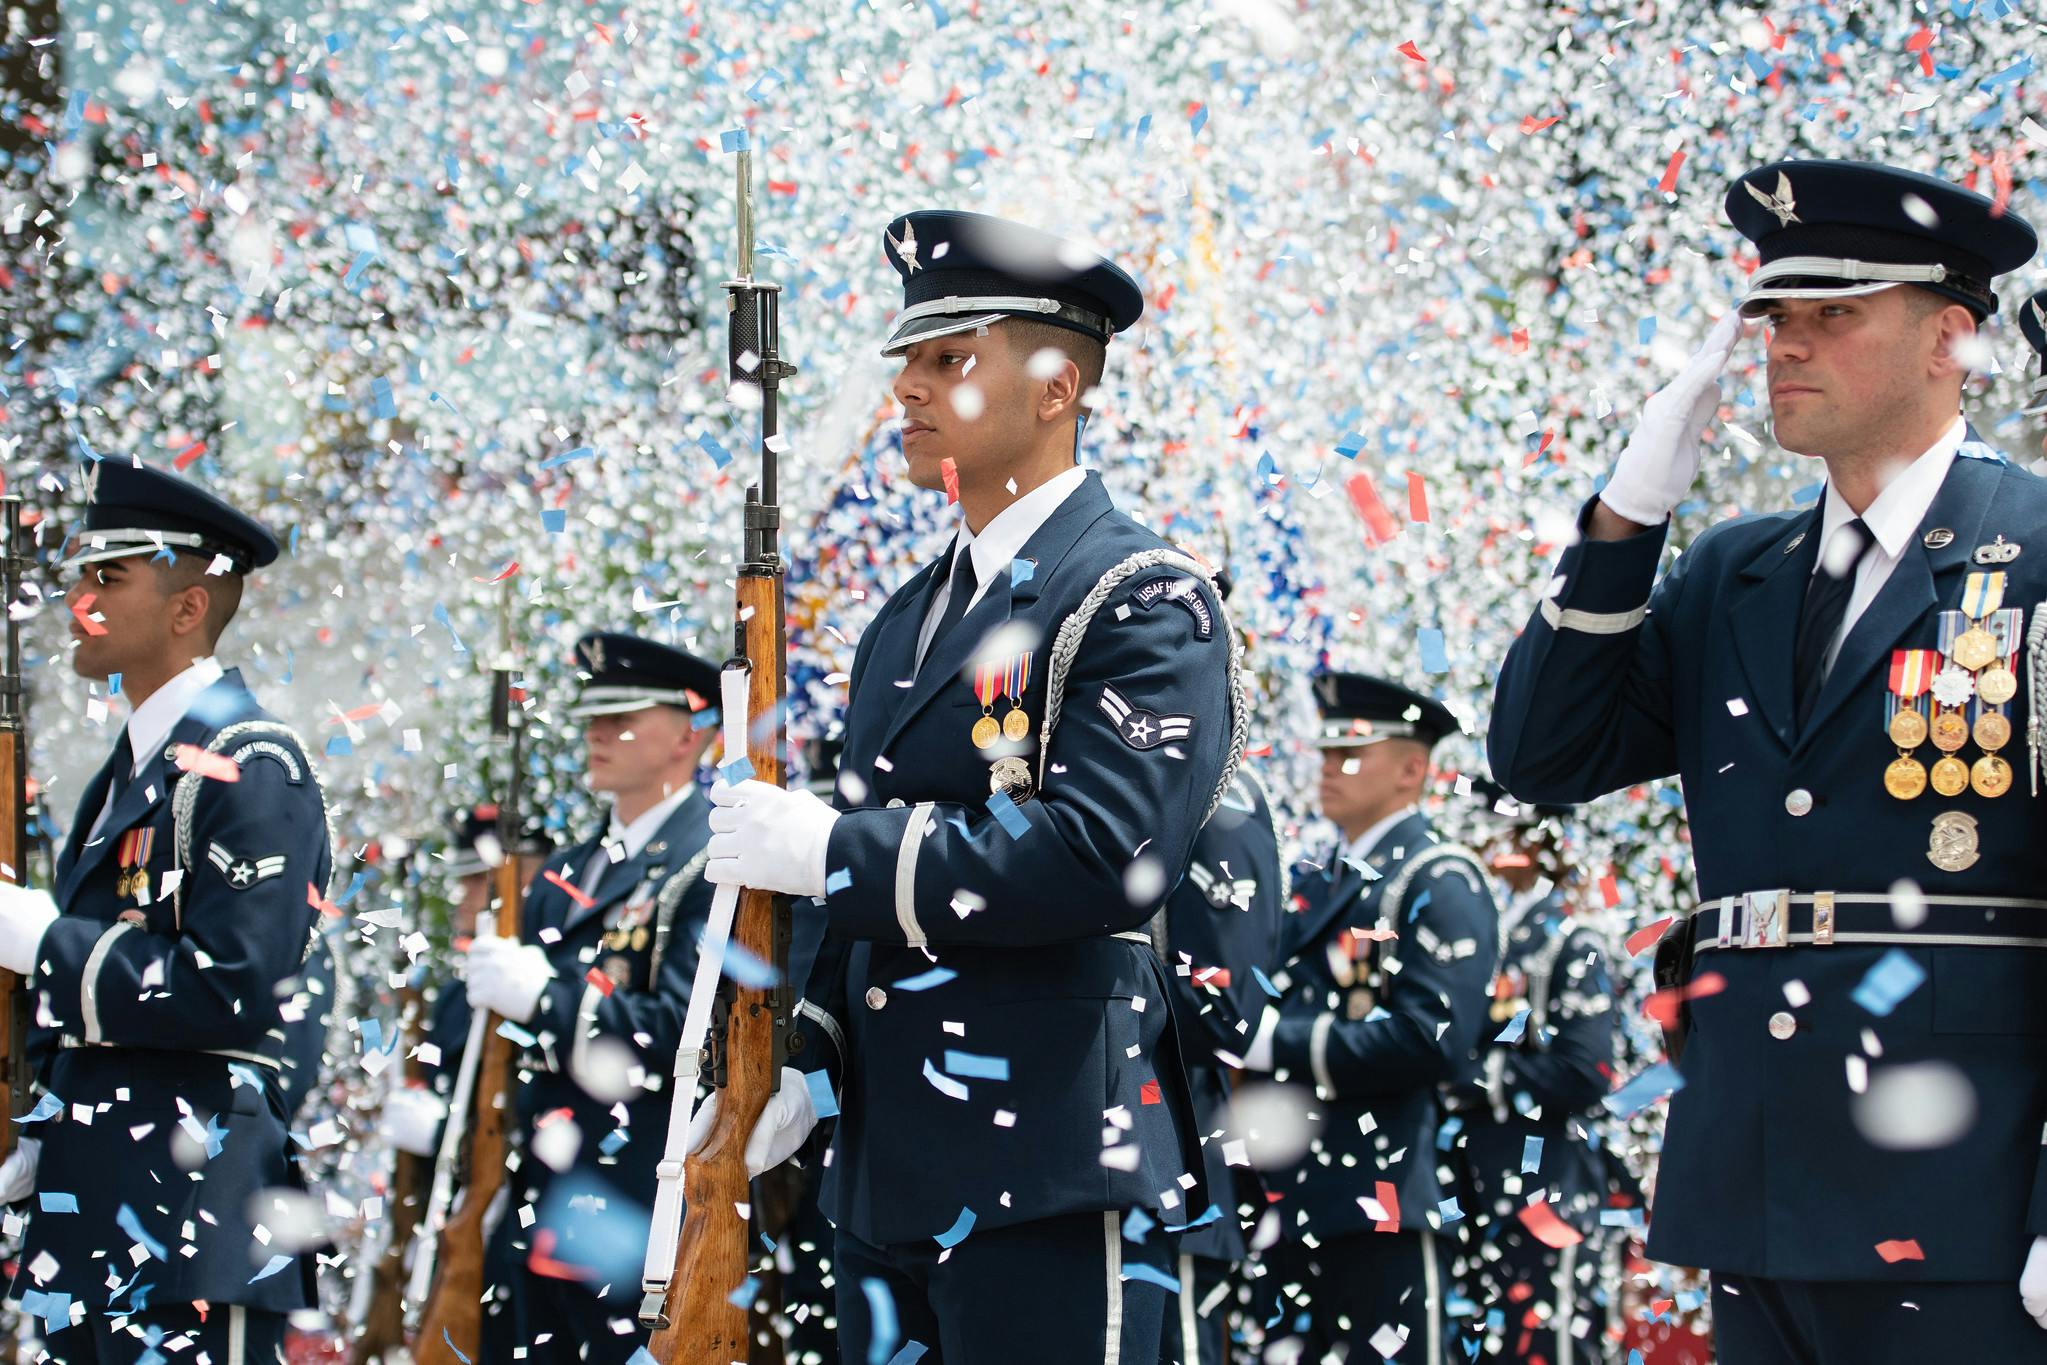 US Air Force soldiers dressed in full dress uniform with confetti flying around them.